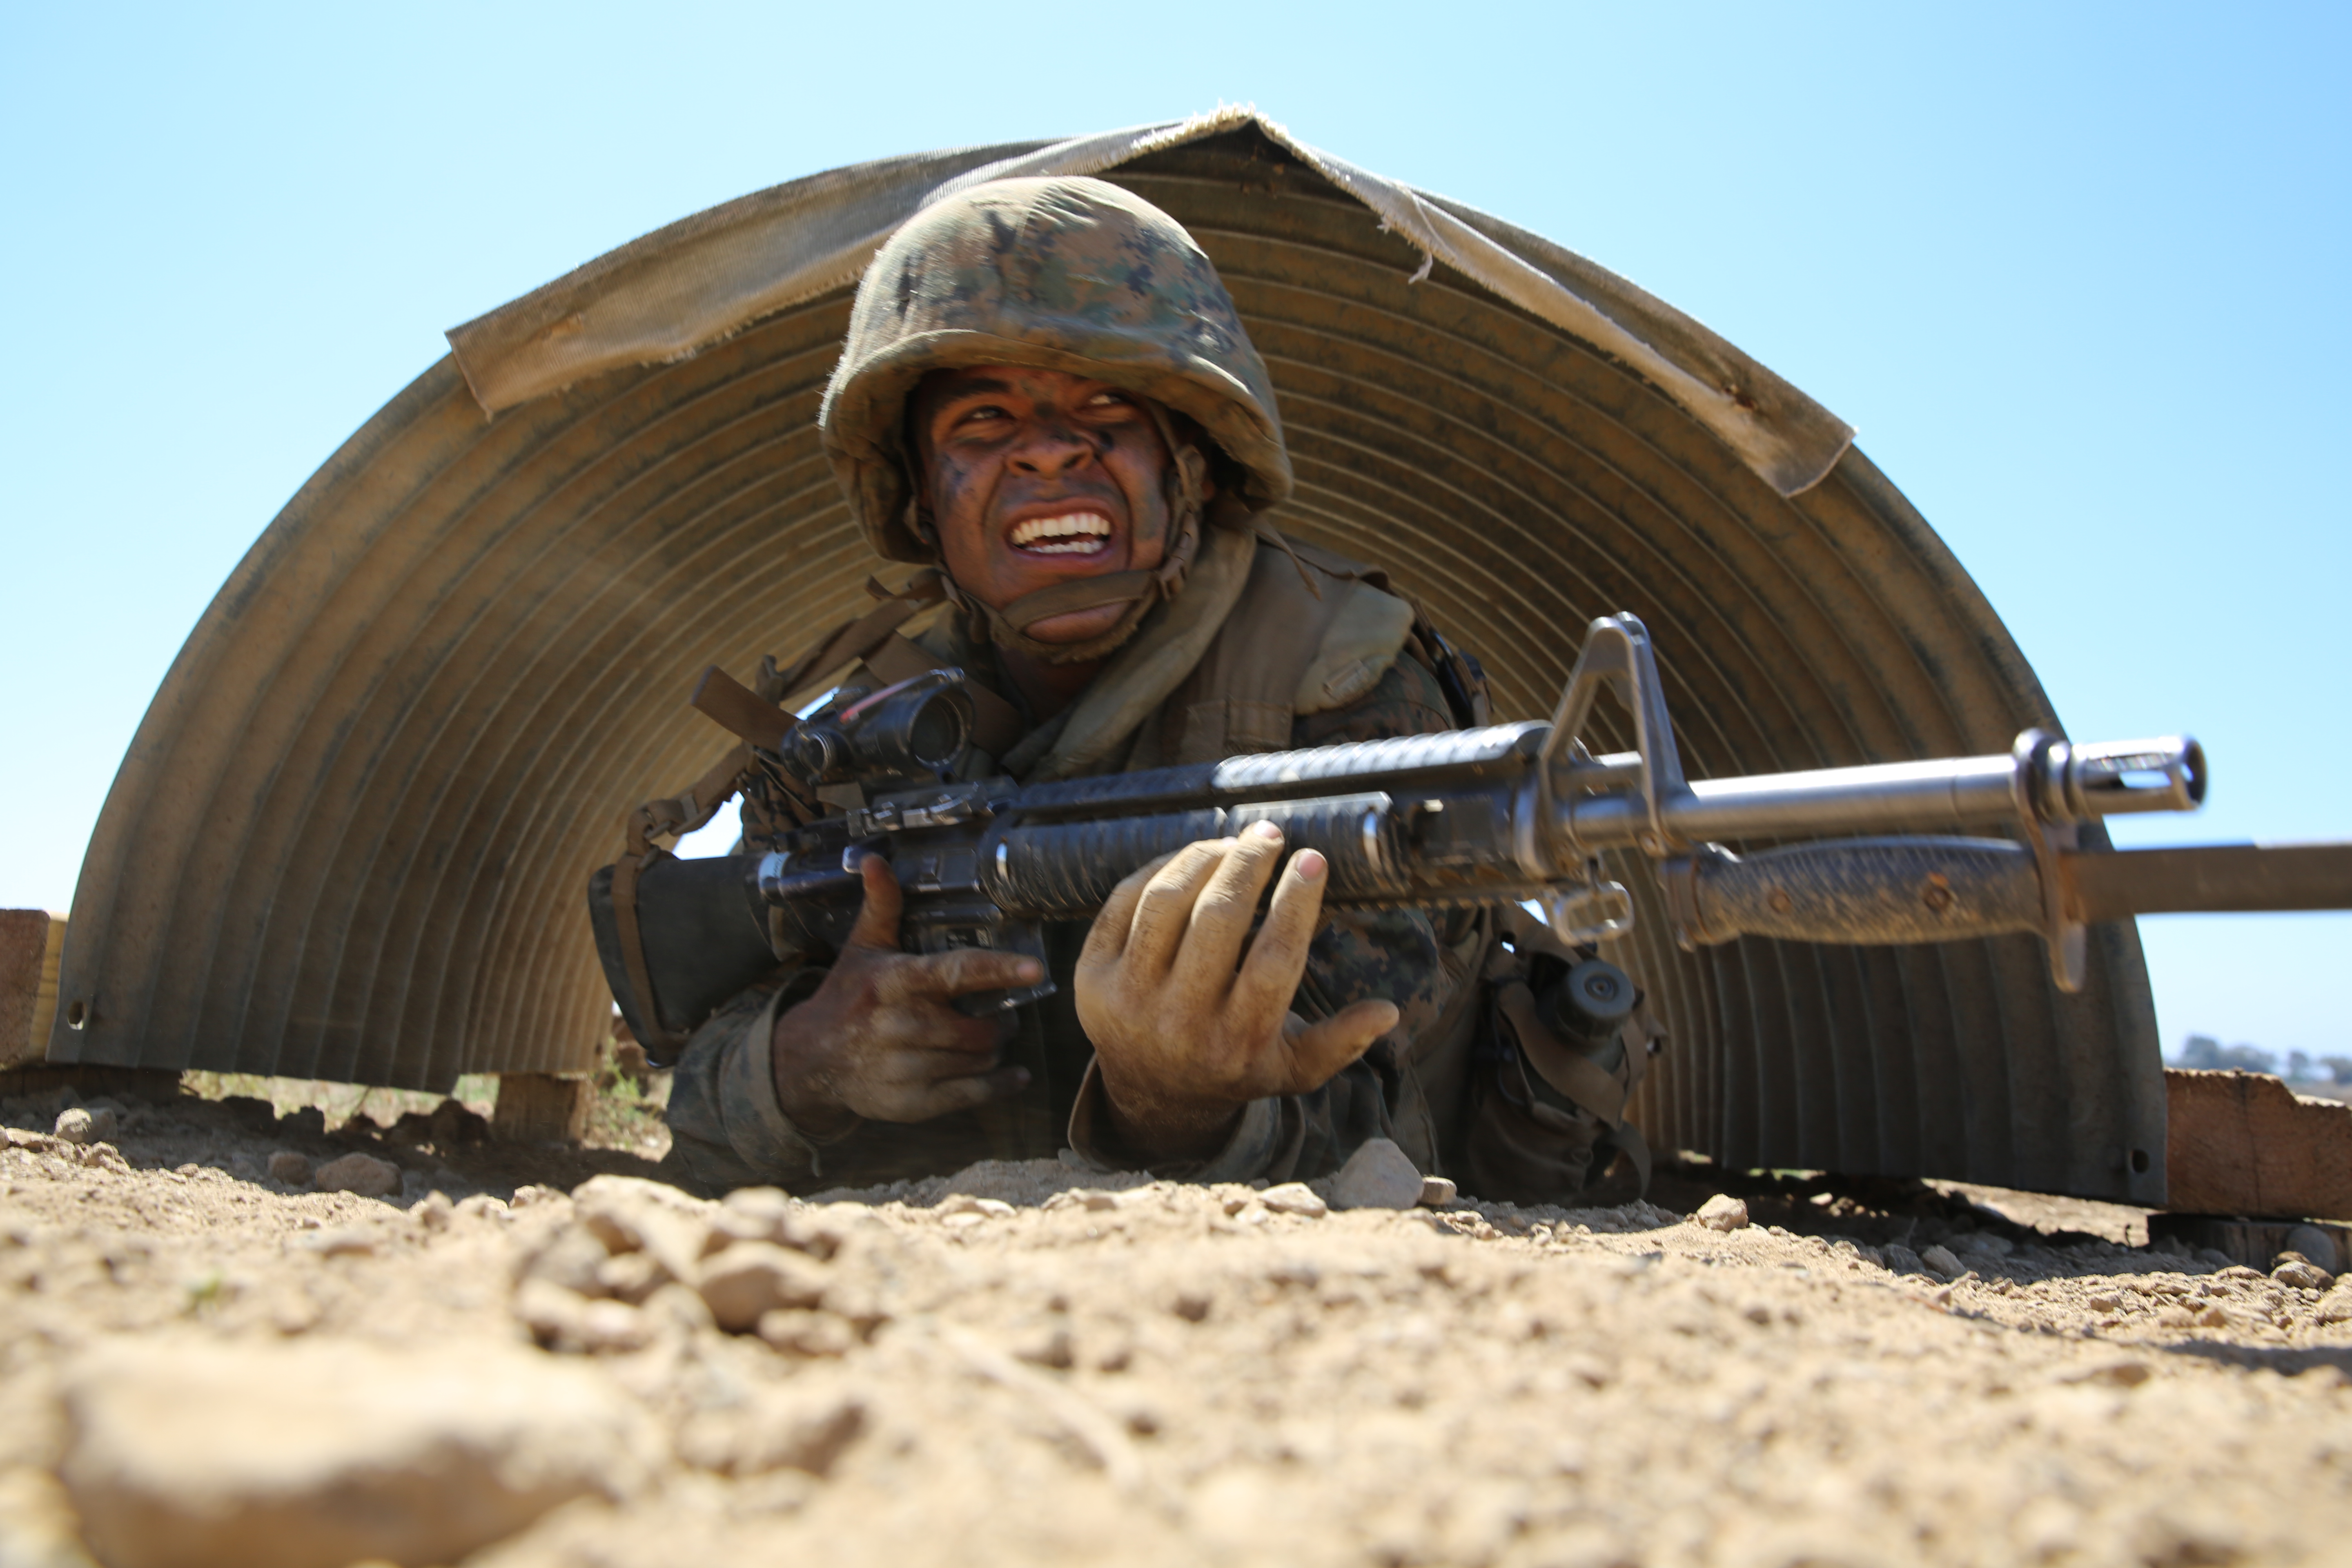 Private Alfonso A. Medina-Arellano, Platoon 3223, Kilo Company, 3rd Recruit Training Battalion, low crawls during the Bayonet Assault Course as part of the Crucible at Edson Range, Marine Corps Base Camp Pendleton, Calif. Sept 11. Over the past three months, recruits learned different bayonet techniques during Marine Corps Martial Arts Program training.